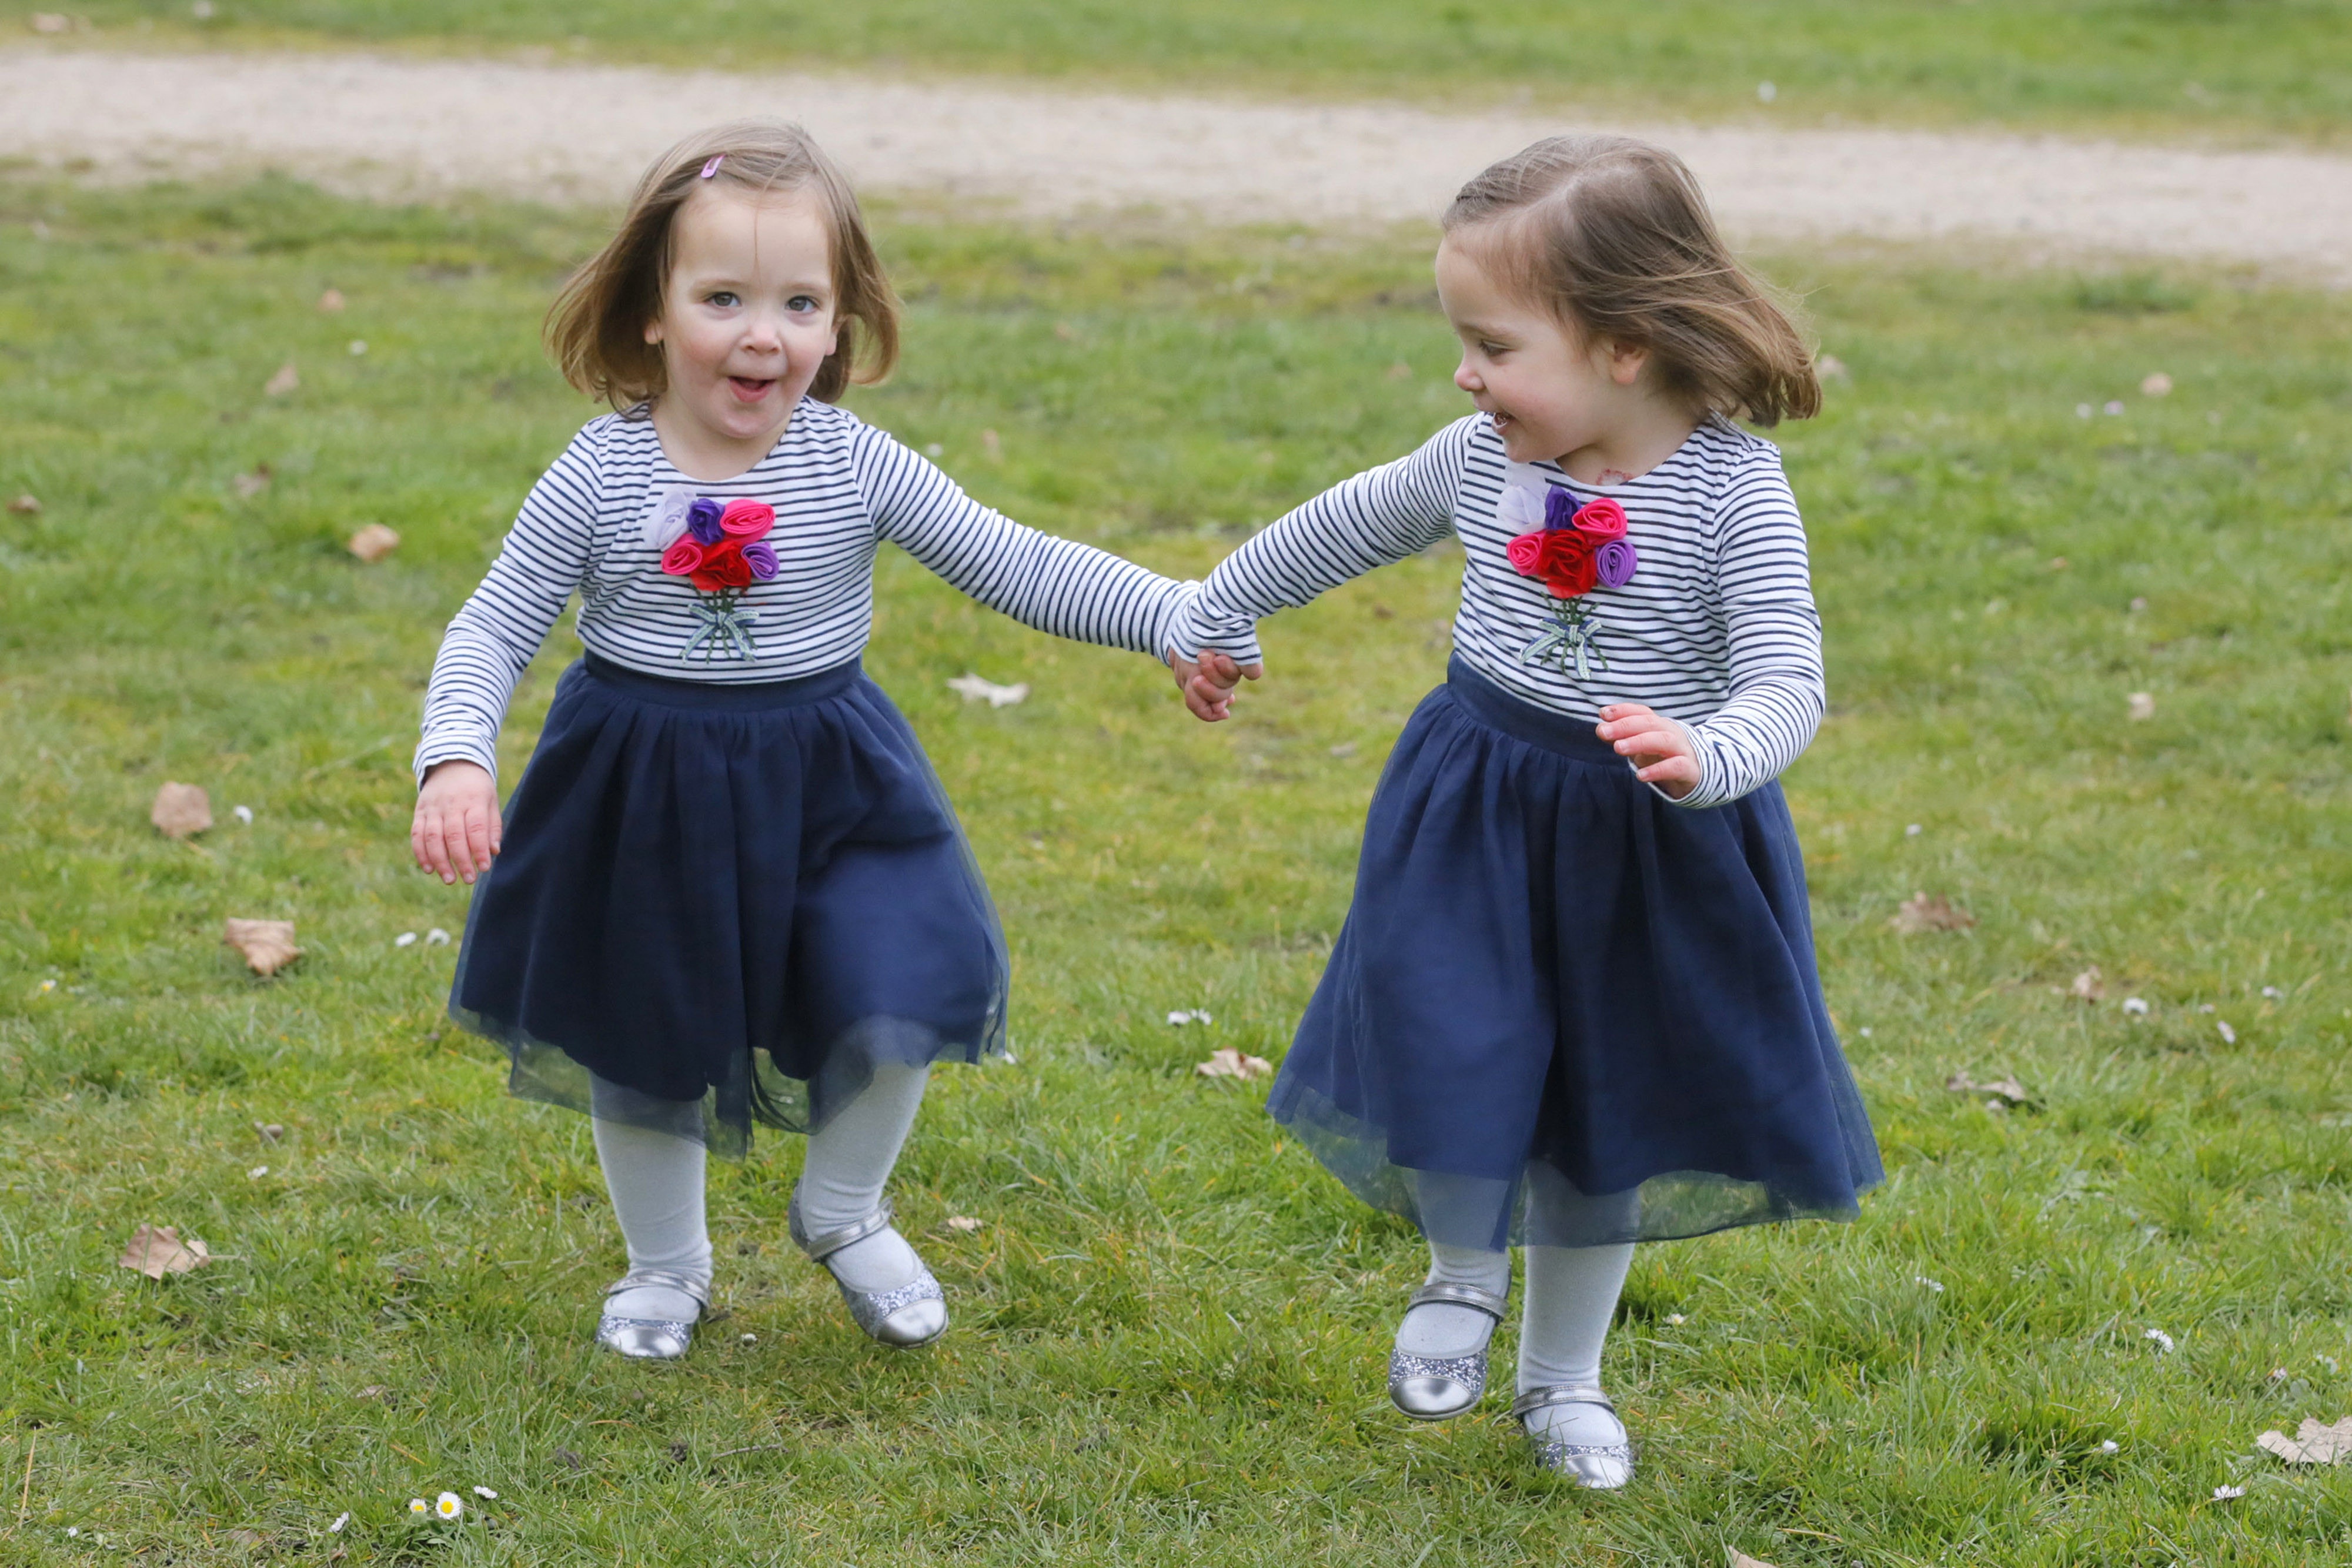 Conjoined twins separated - show they're still as close as ever